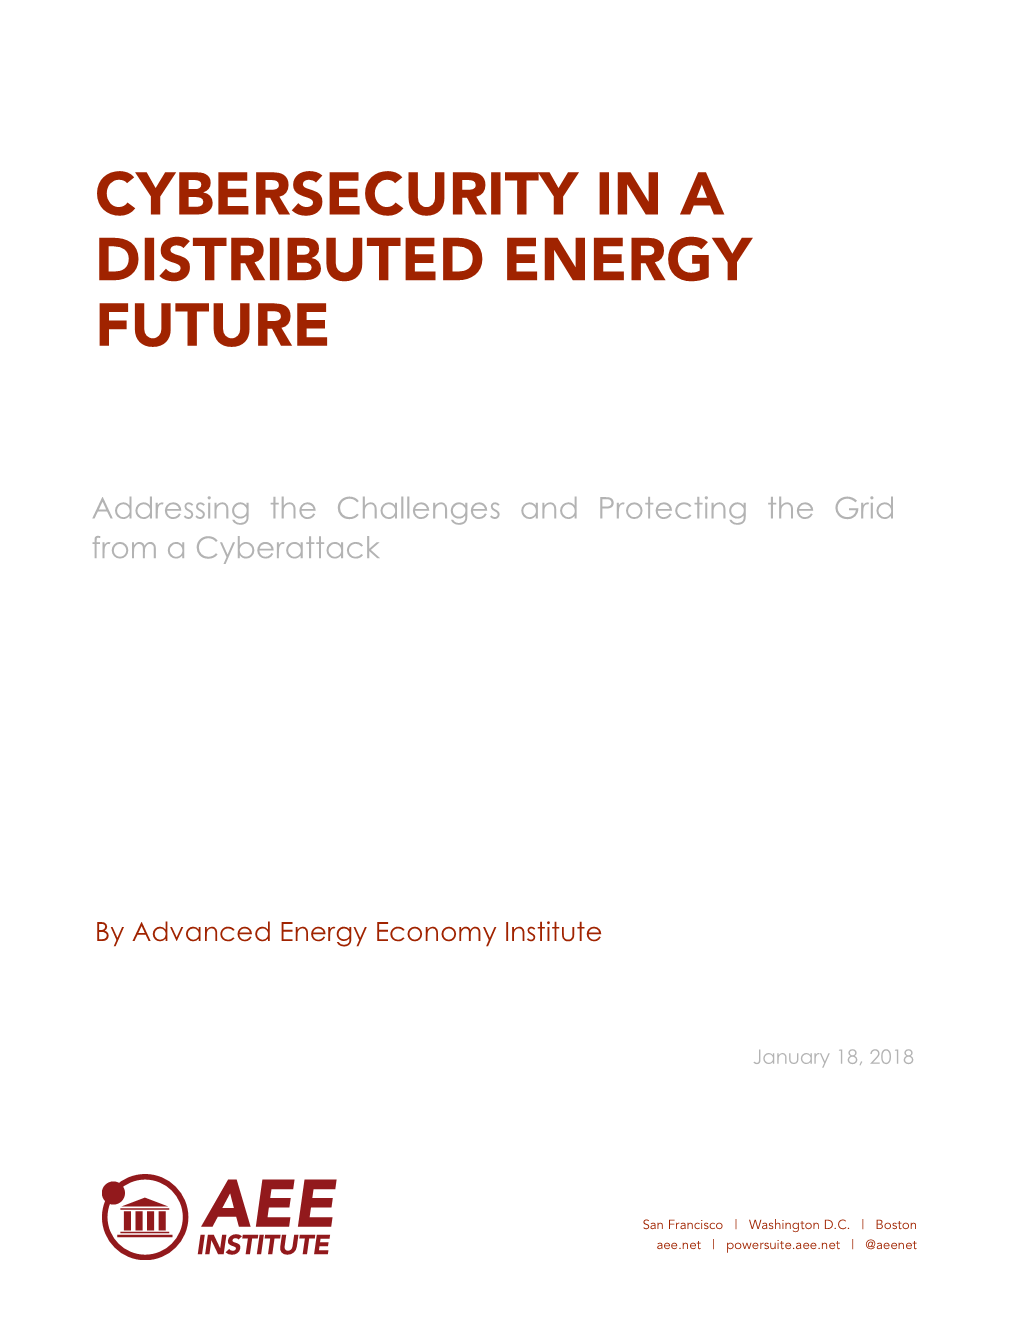 Cybersecurity in a Distributed Energy Future